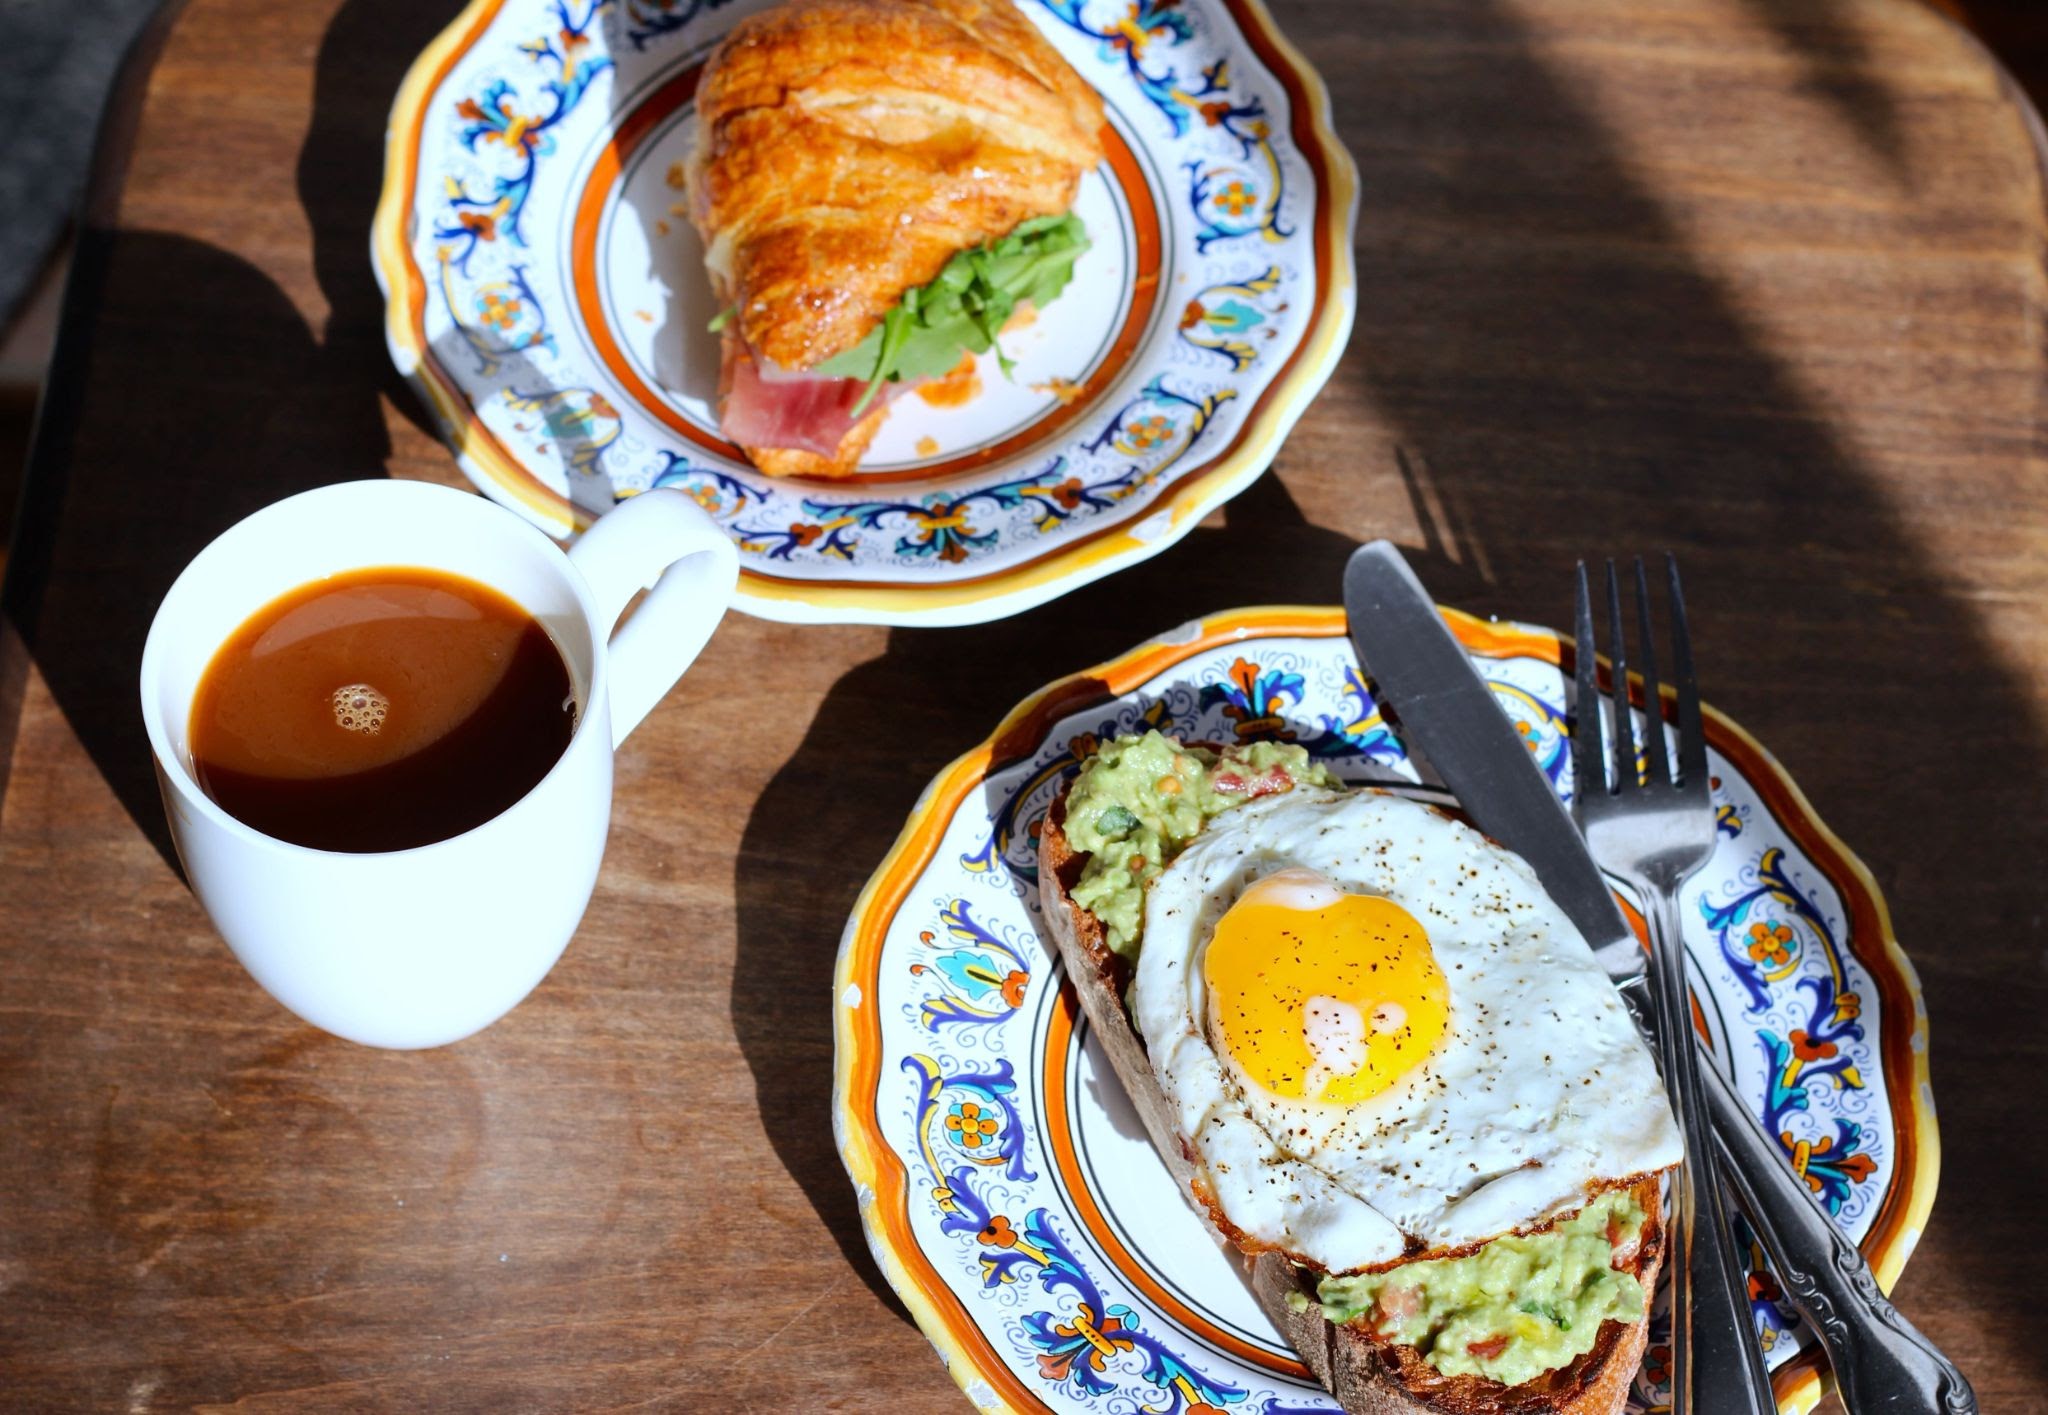 7 BREAKFAST TRENDS OF THE PAST DECADE